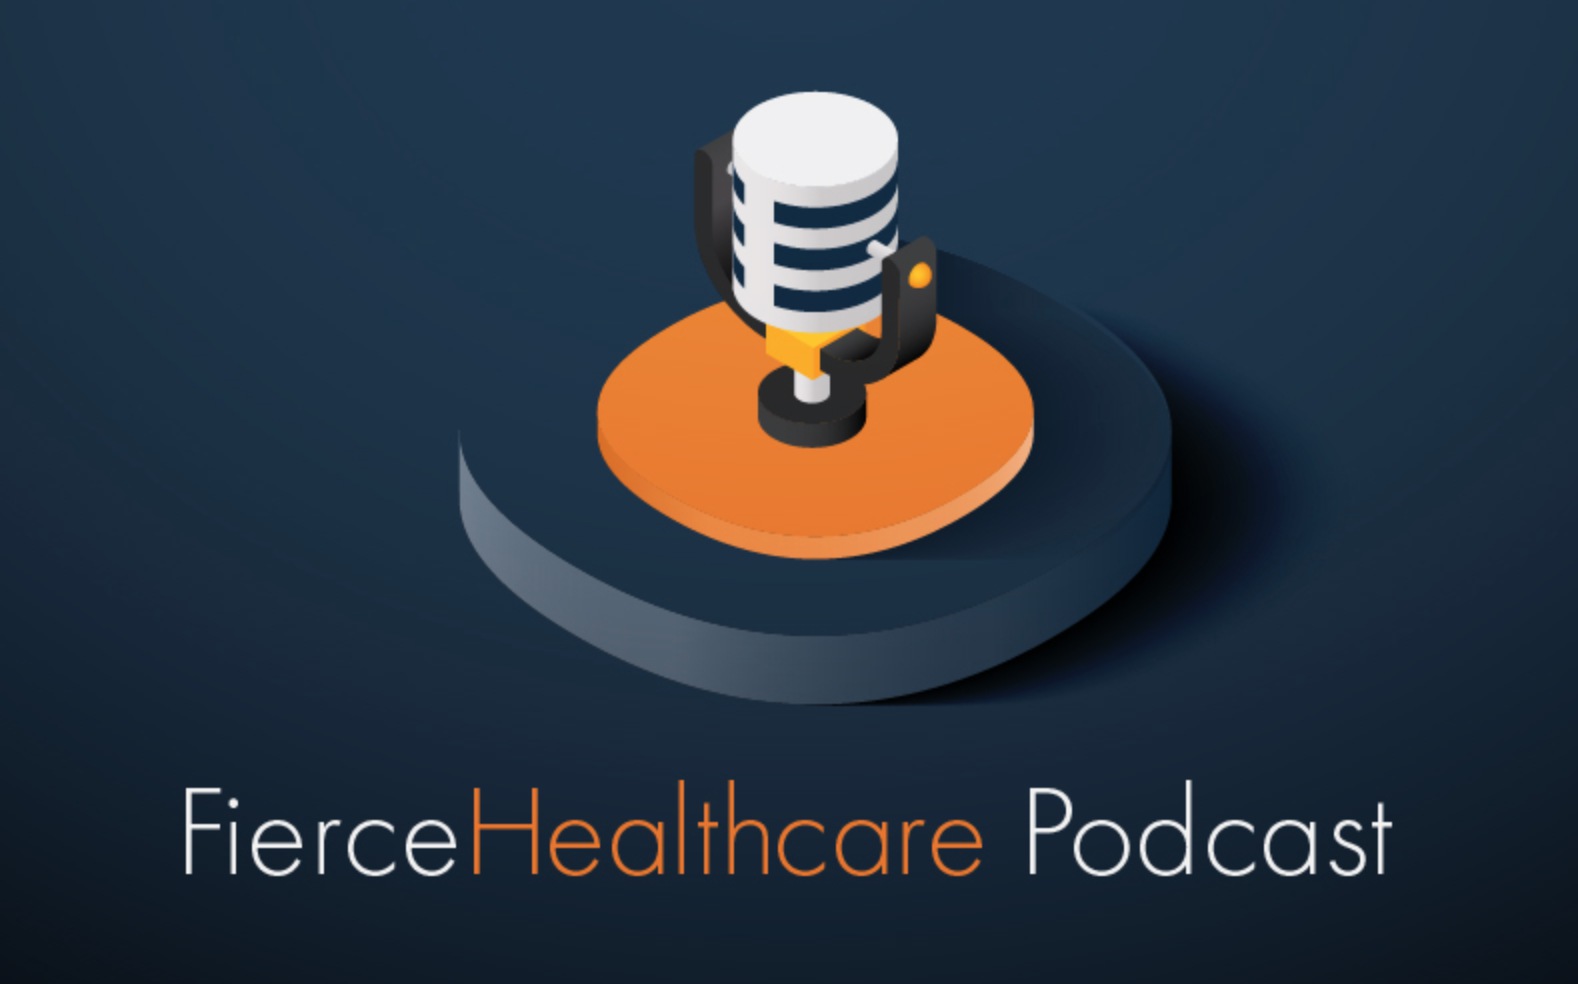 Podcast: What to watch in healthcare in 2020